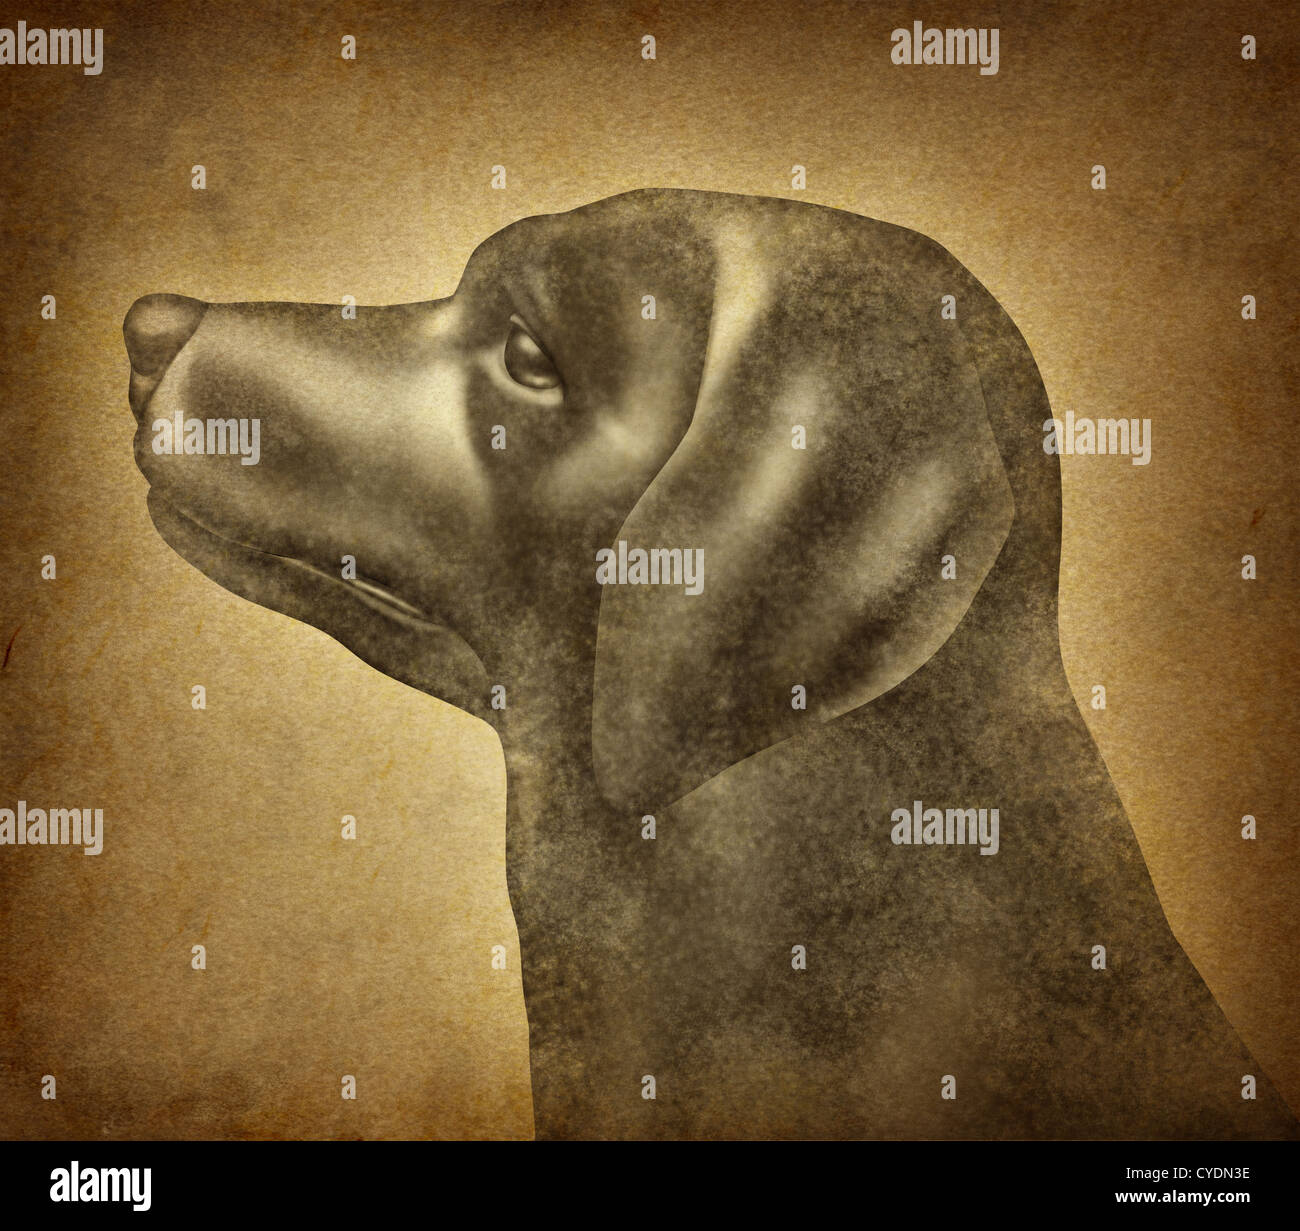 Grunge Dog on an old parchment paper texture as a symbol of veterinary canine health care for house pets and veterinarian services or training of mixed breed and a purebred puppy. Stock Photo